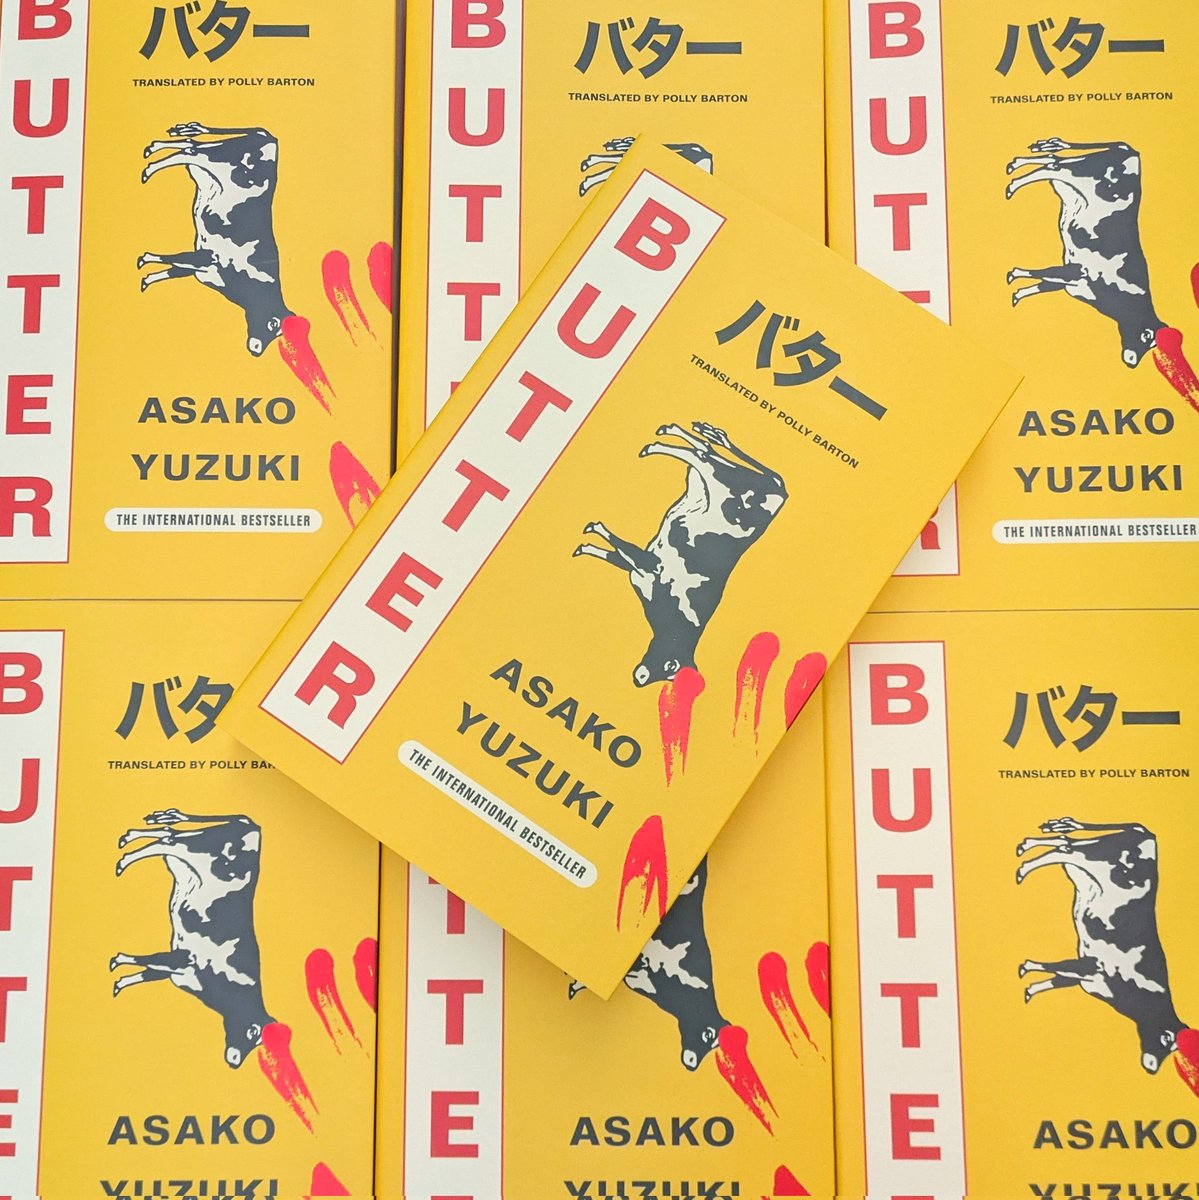 Teeming with insights into sexism, obsession, and pleasure, this glorious Japanese cult classic revolves around a famed female chef convicted as a serial killer and a story-hungry young journalist who wishes to learn the secrets of gourmet. #waterstones #butter #asakoyuzuki